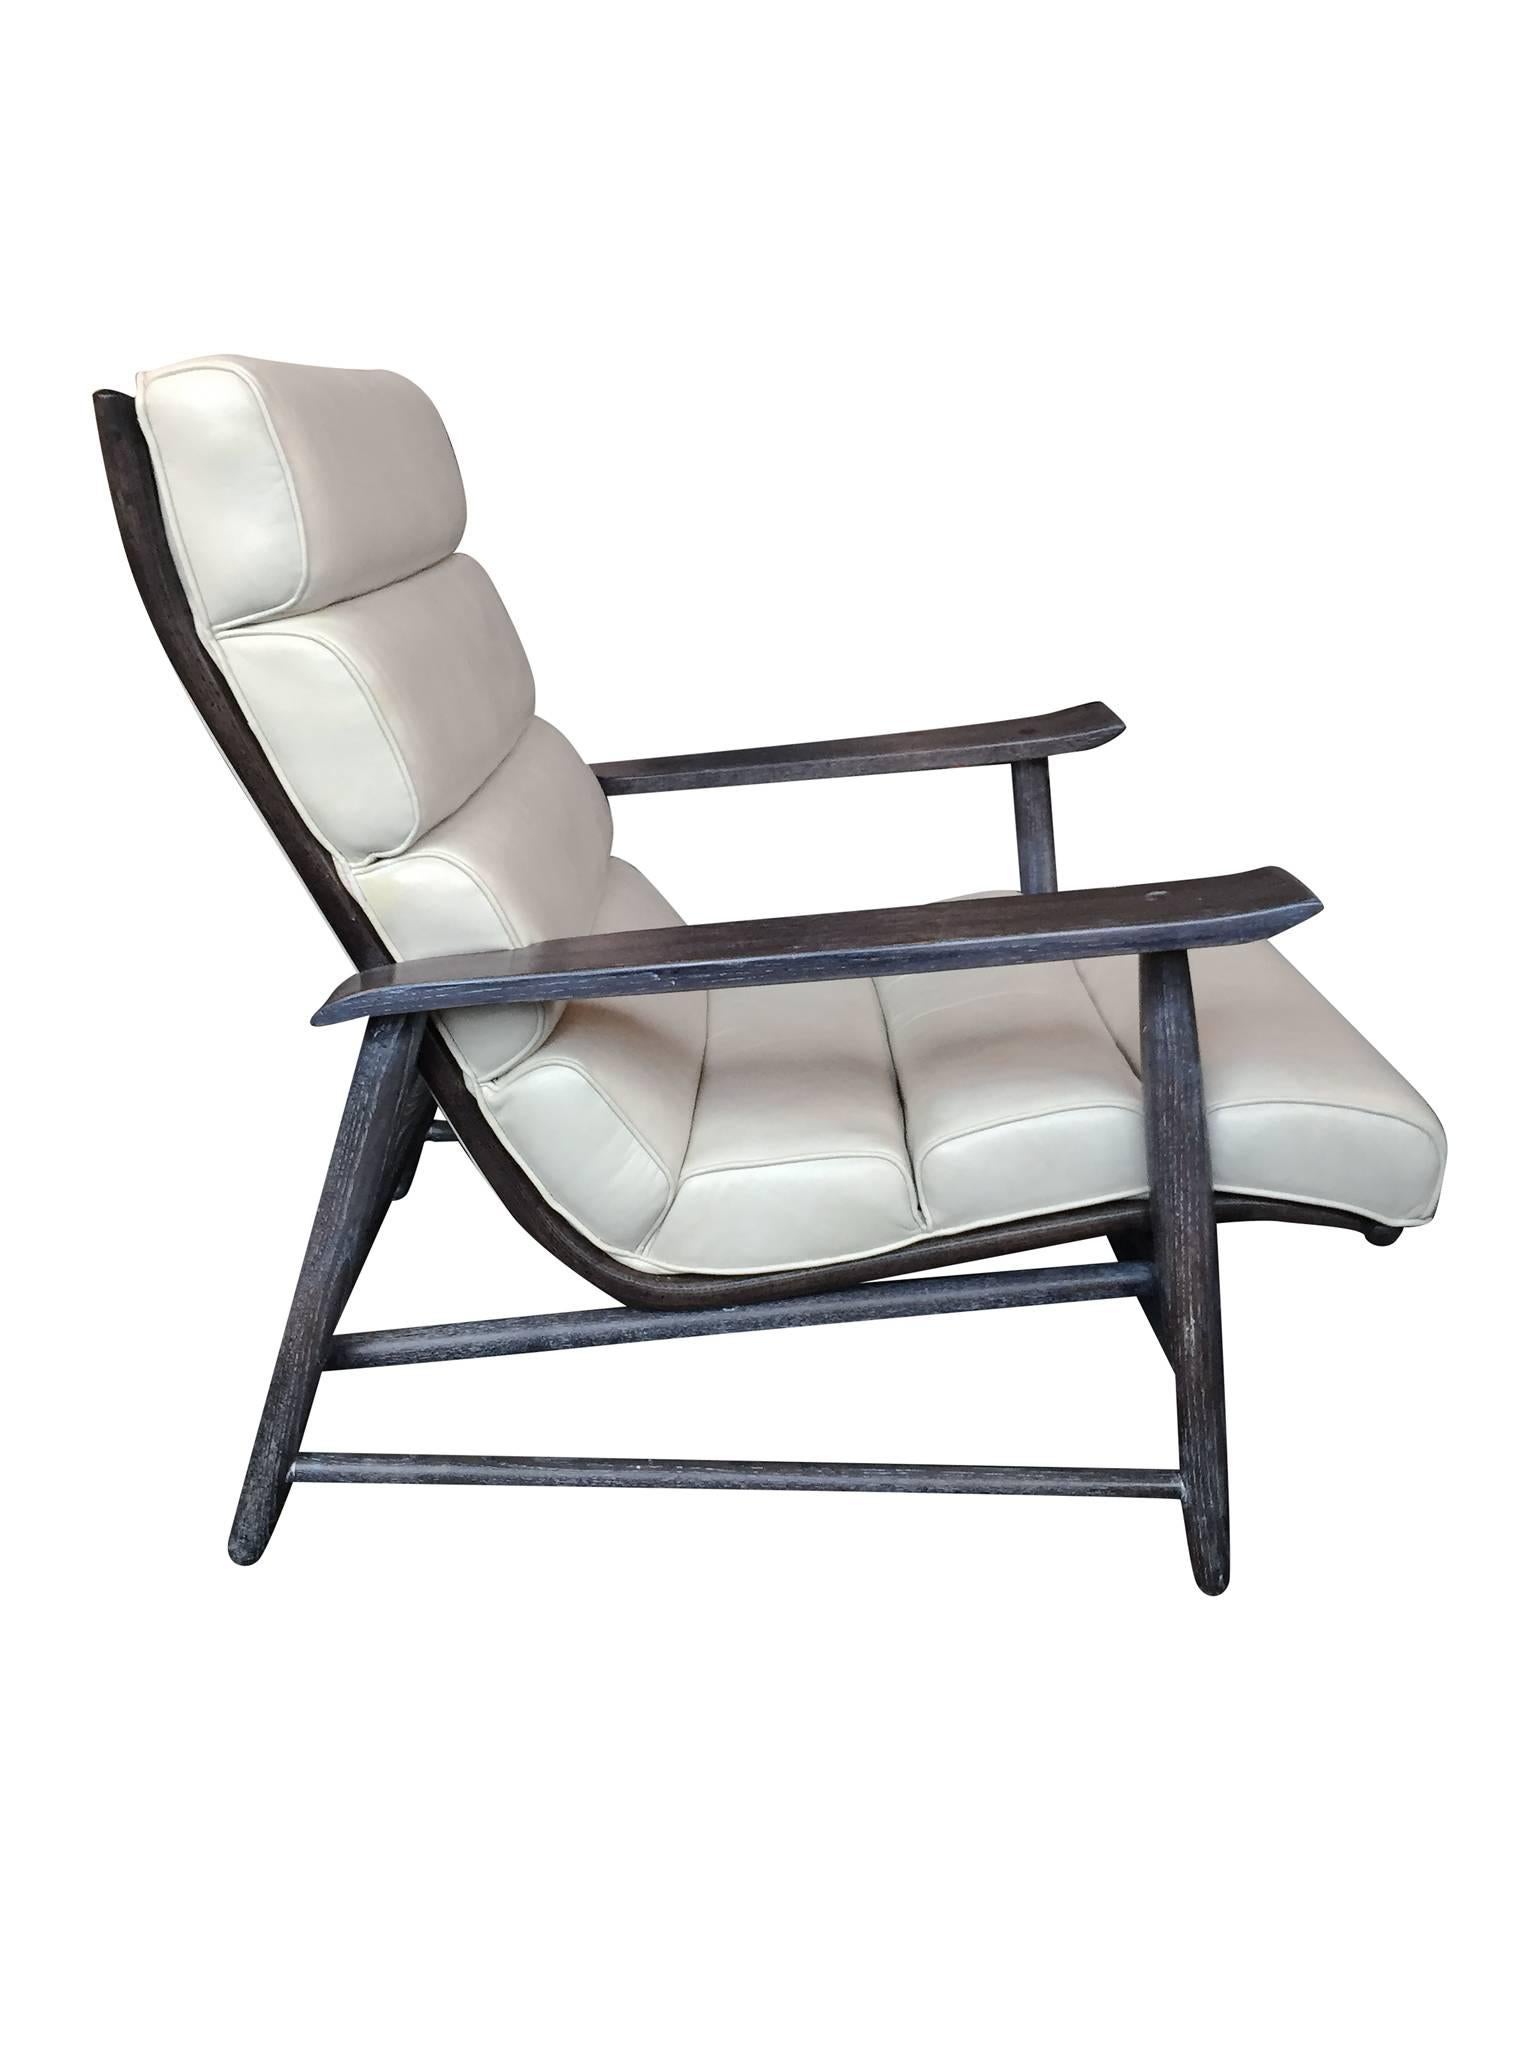 Post-Modern 1960s Cerused Oak and Ecru Leather Armchair in the Manner of Jay Spectre